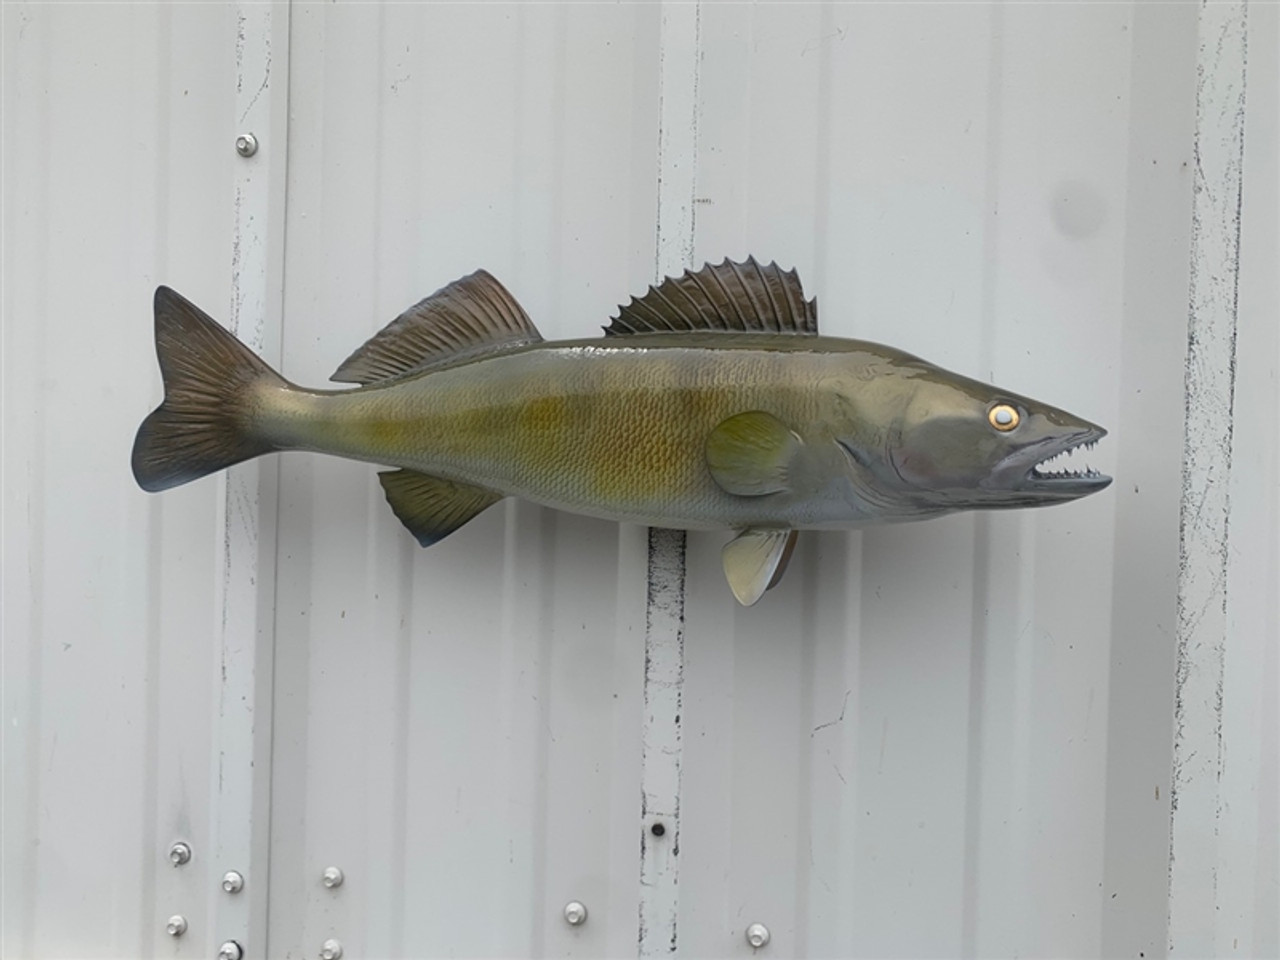 Taking Photos for Your Replica Fish Mount - Coastal Angler & The